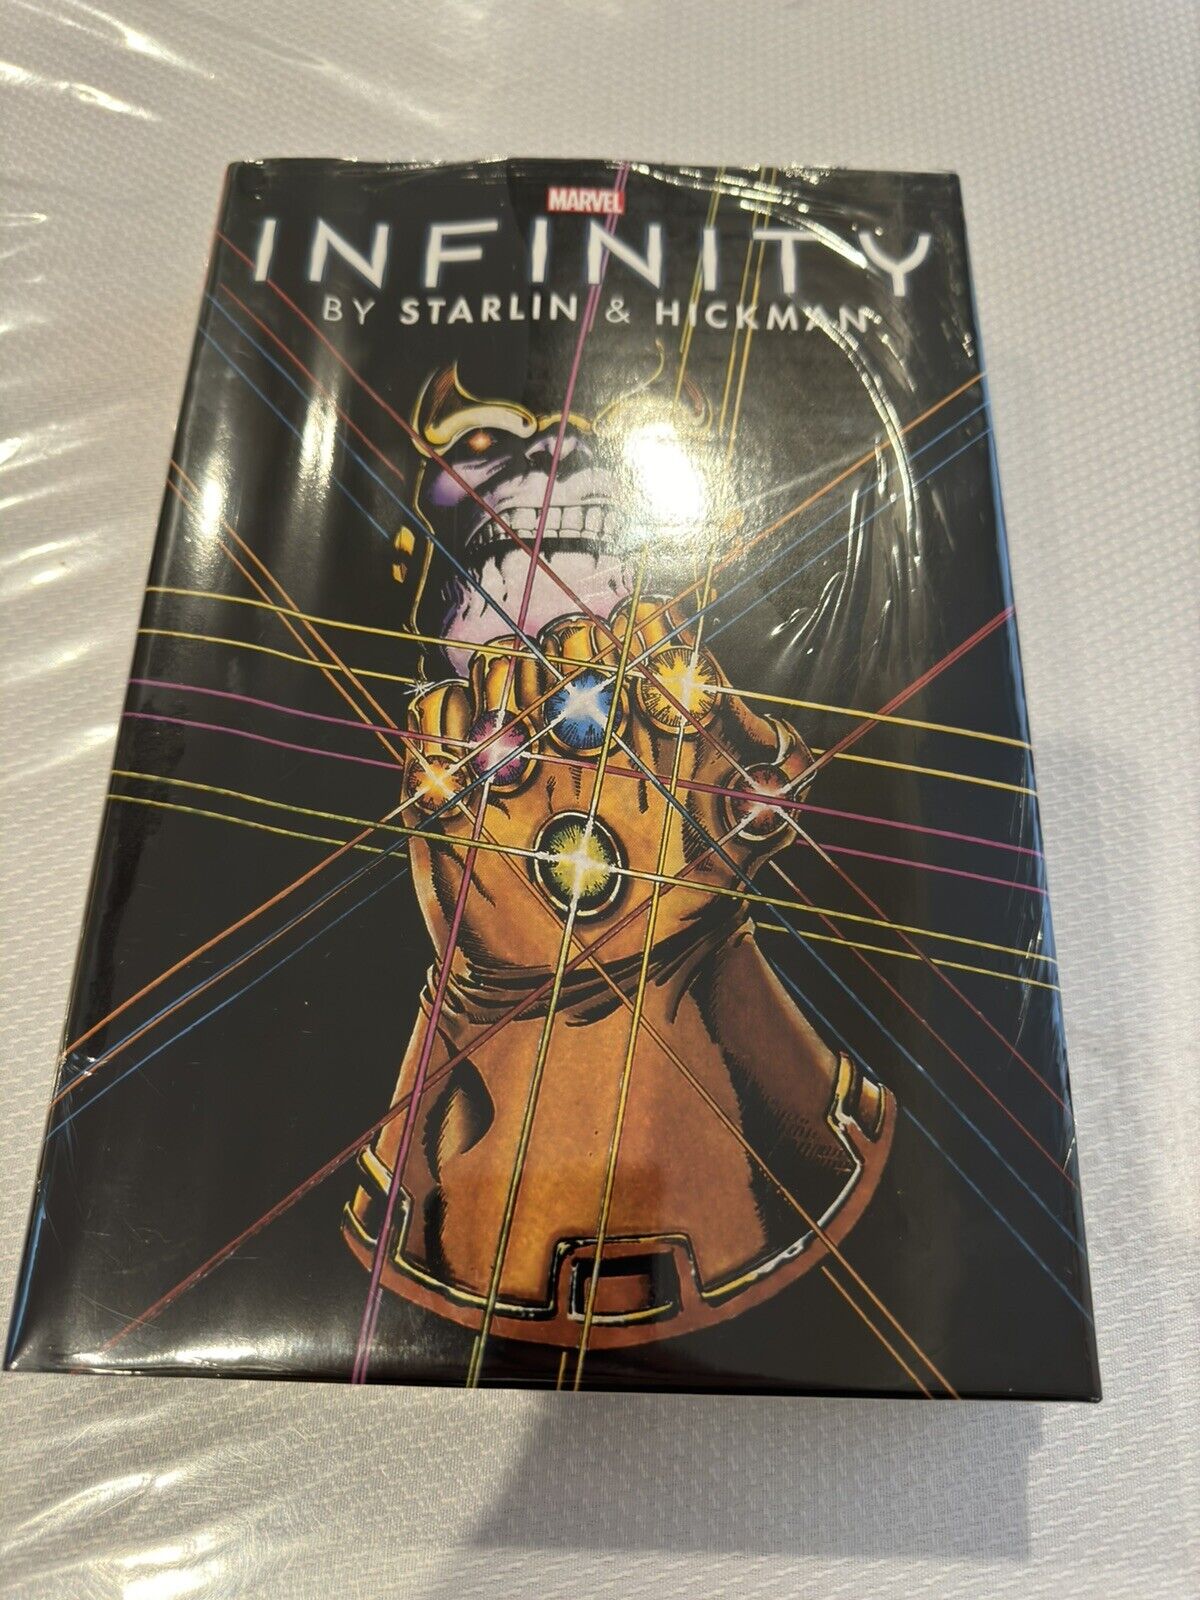 INFINITY BY STARLIN & HICKMAN OMNIBUS THANOS MARVEL HARDCOVER BRAND NEW & SEALED